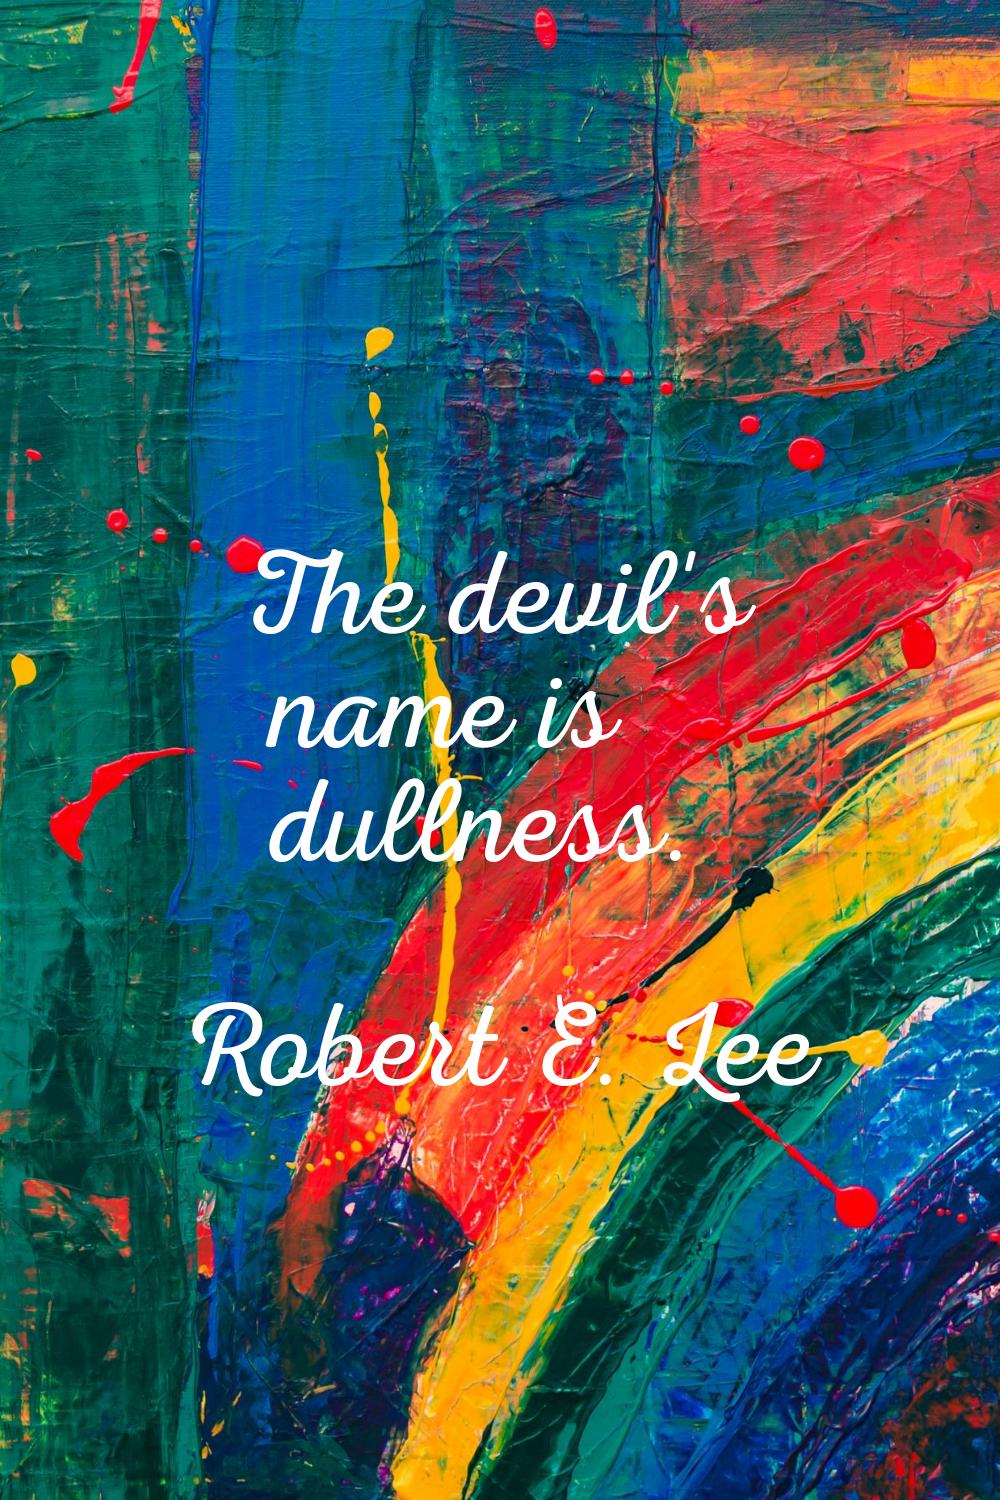 The devil's name is dullness.